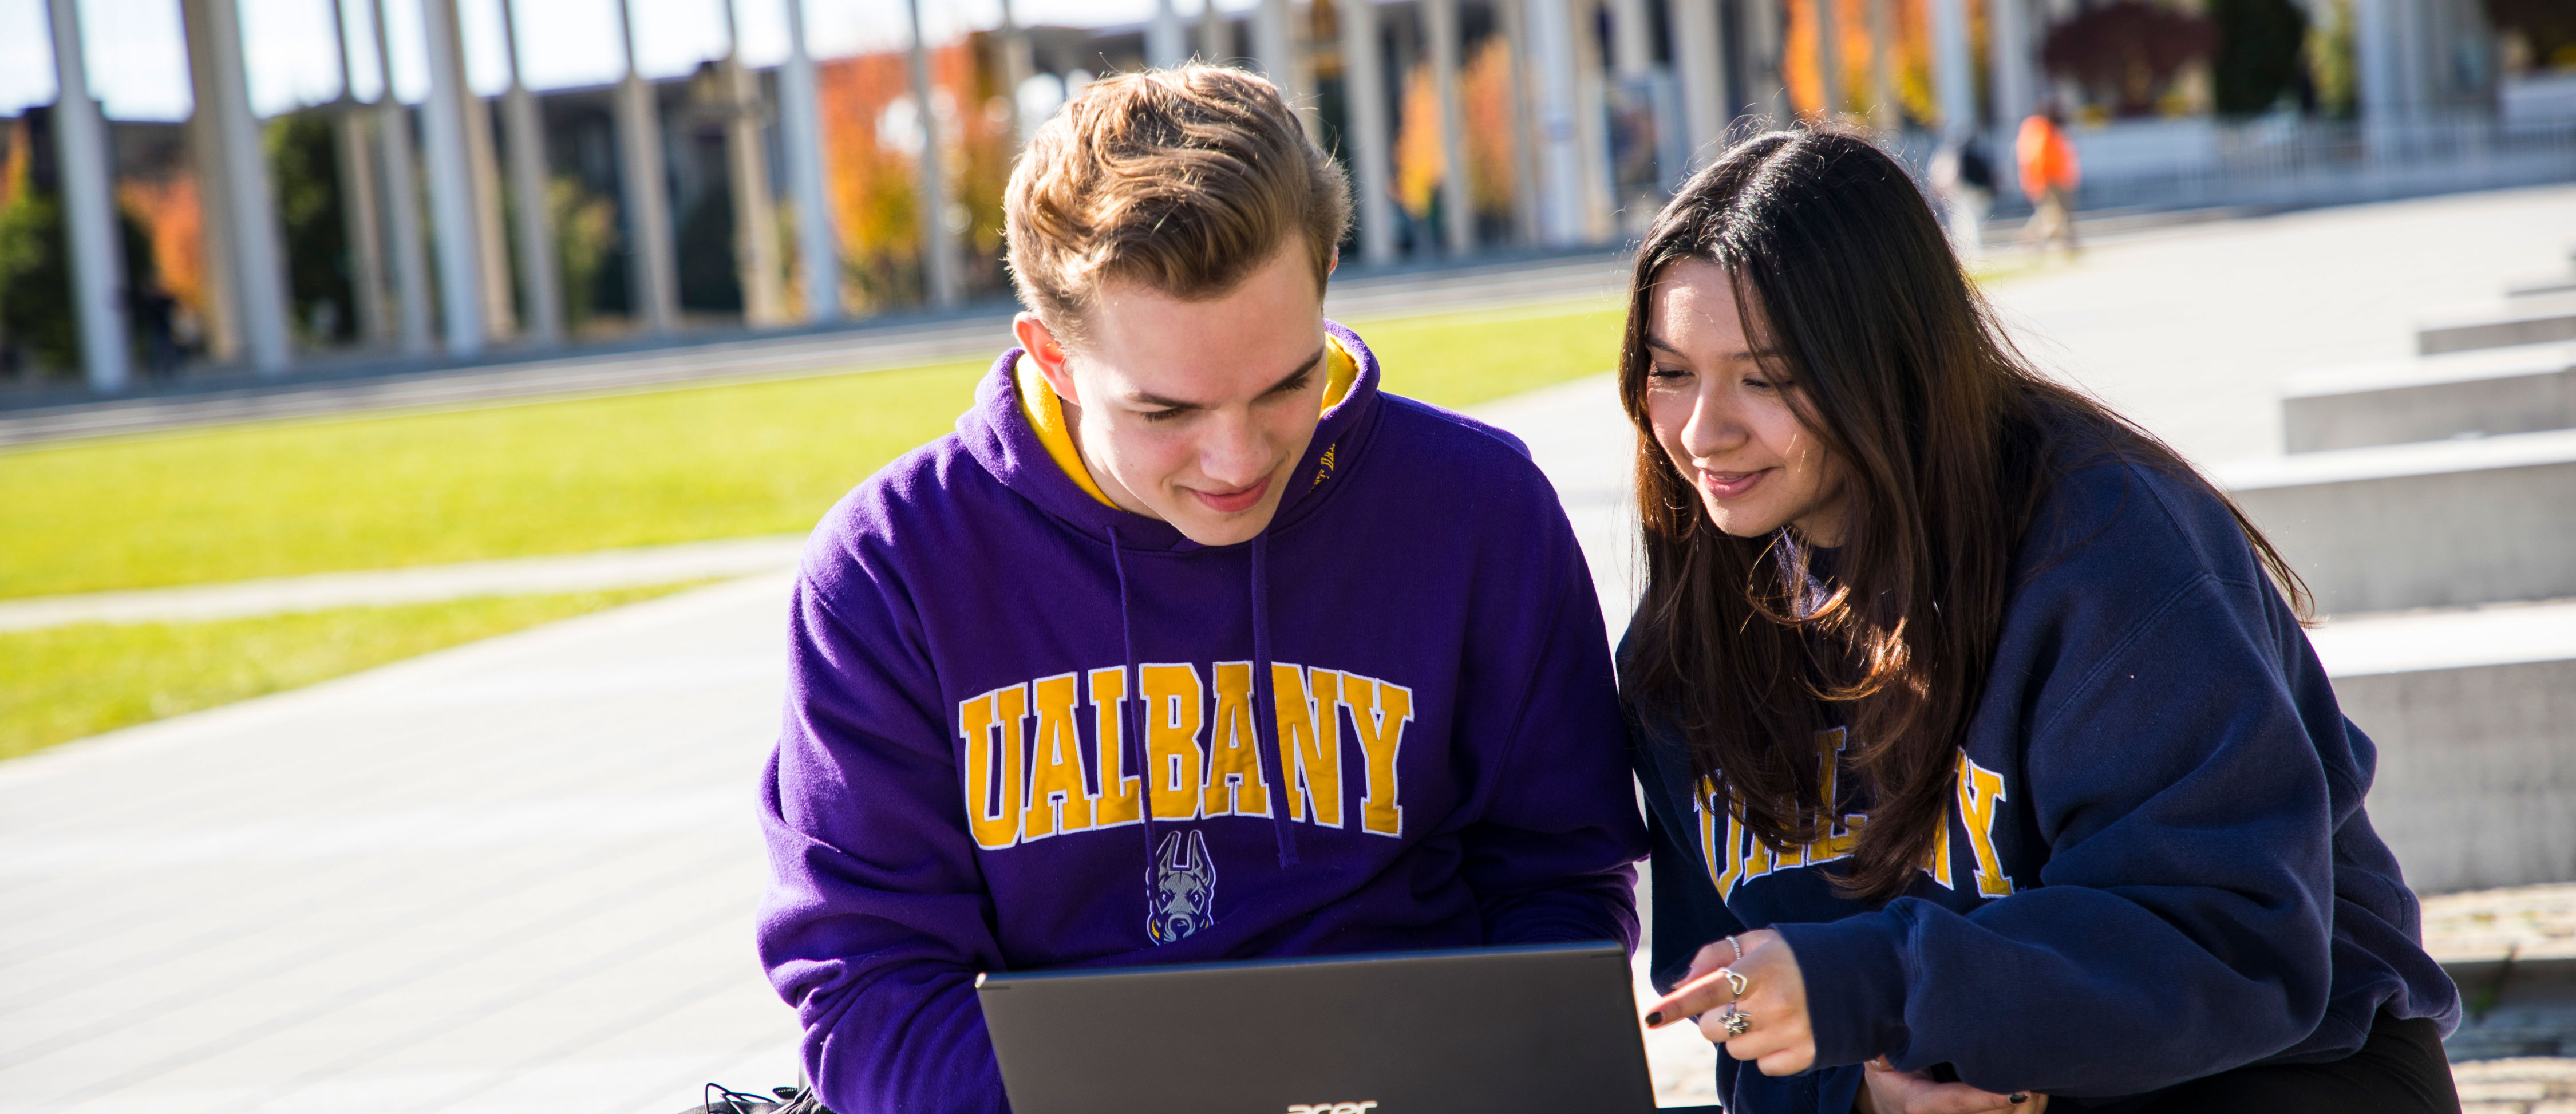 Two students wearing UAlbany sweatshirts sit on a bench outdoors on the Uptown Campus and look at a laptop together.